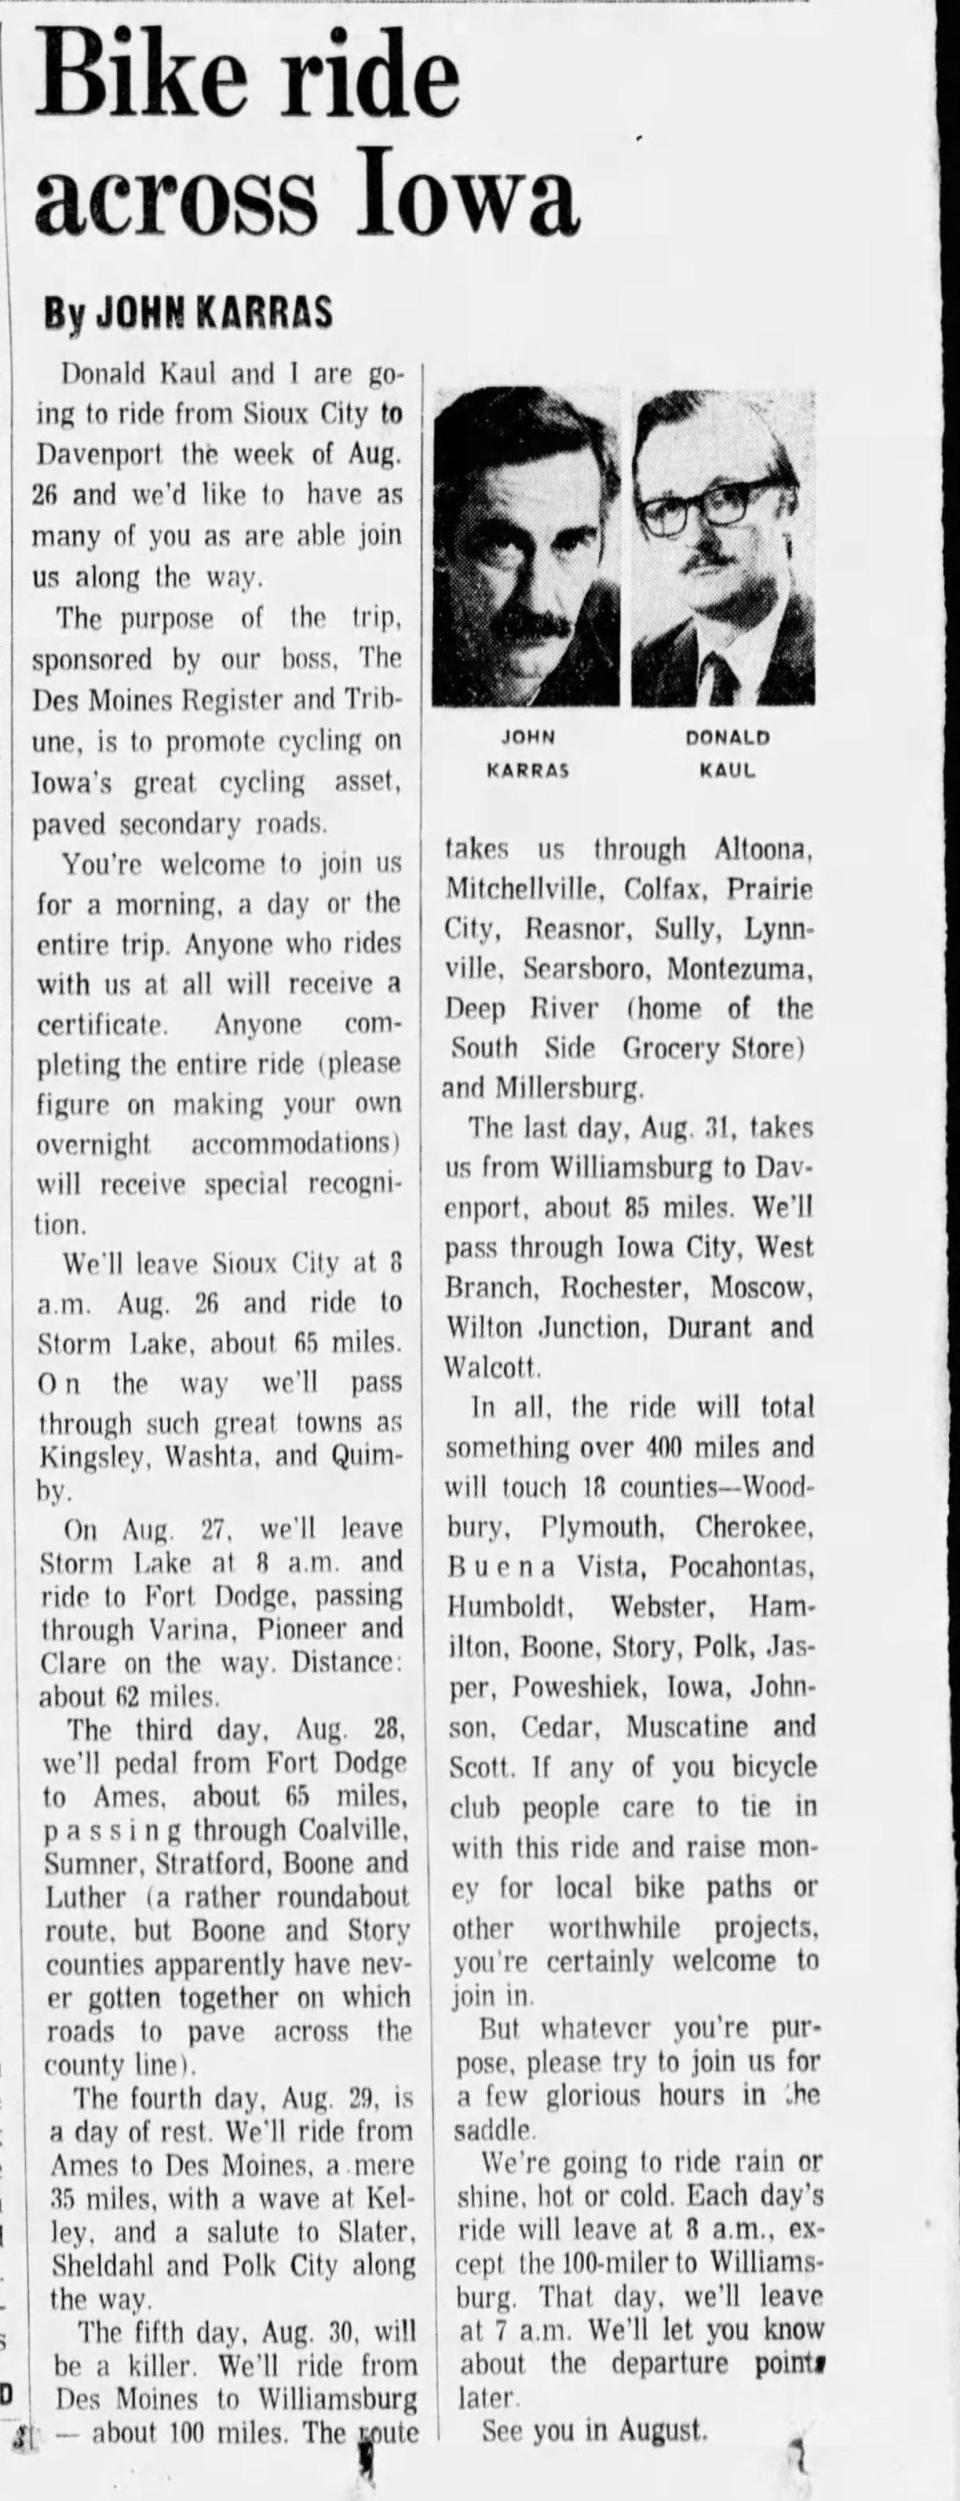 RAGBRAI co-founder John Karras wrote a 1973 column that invited readers along a promotional bike ride that Karras had planned with columnist Donald Kaul. About 200 riders showed up in Sioux City for the start of the Great Six-Day Bicycle Trip. In 1975 the ride was renamed the Register's Annual Great Bicycle Ride Across Iowa.